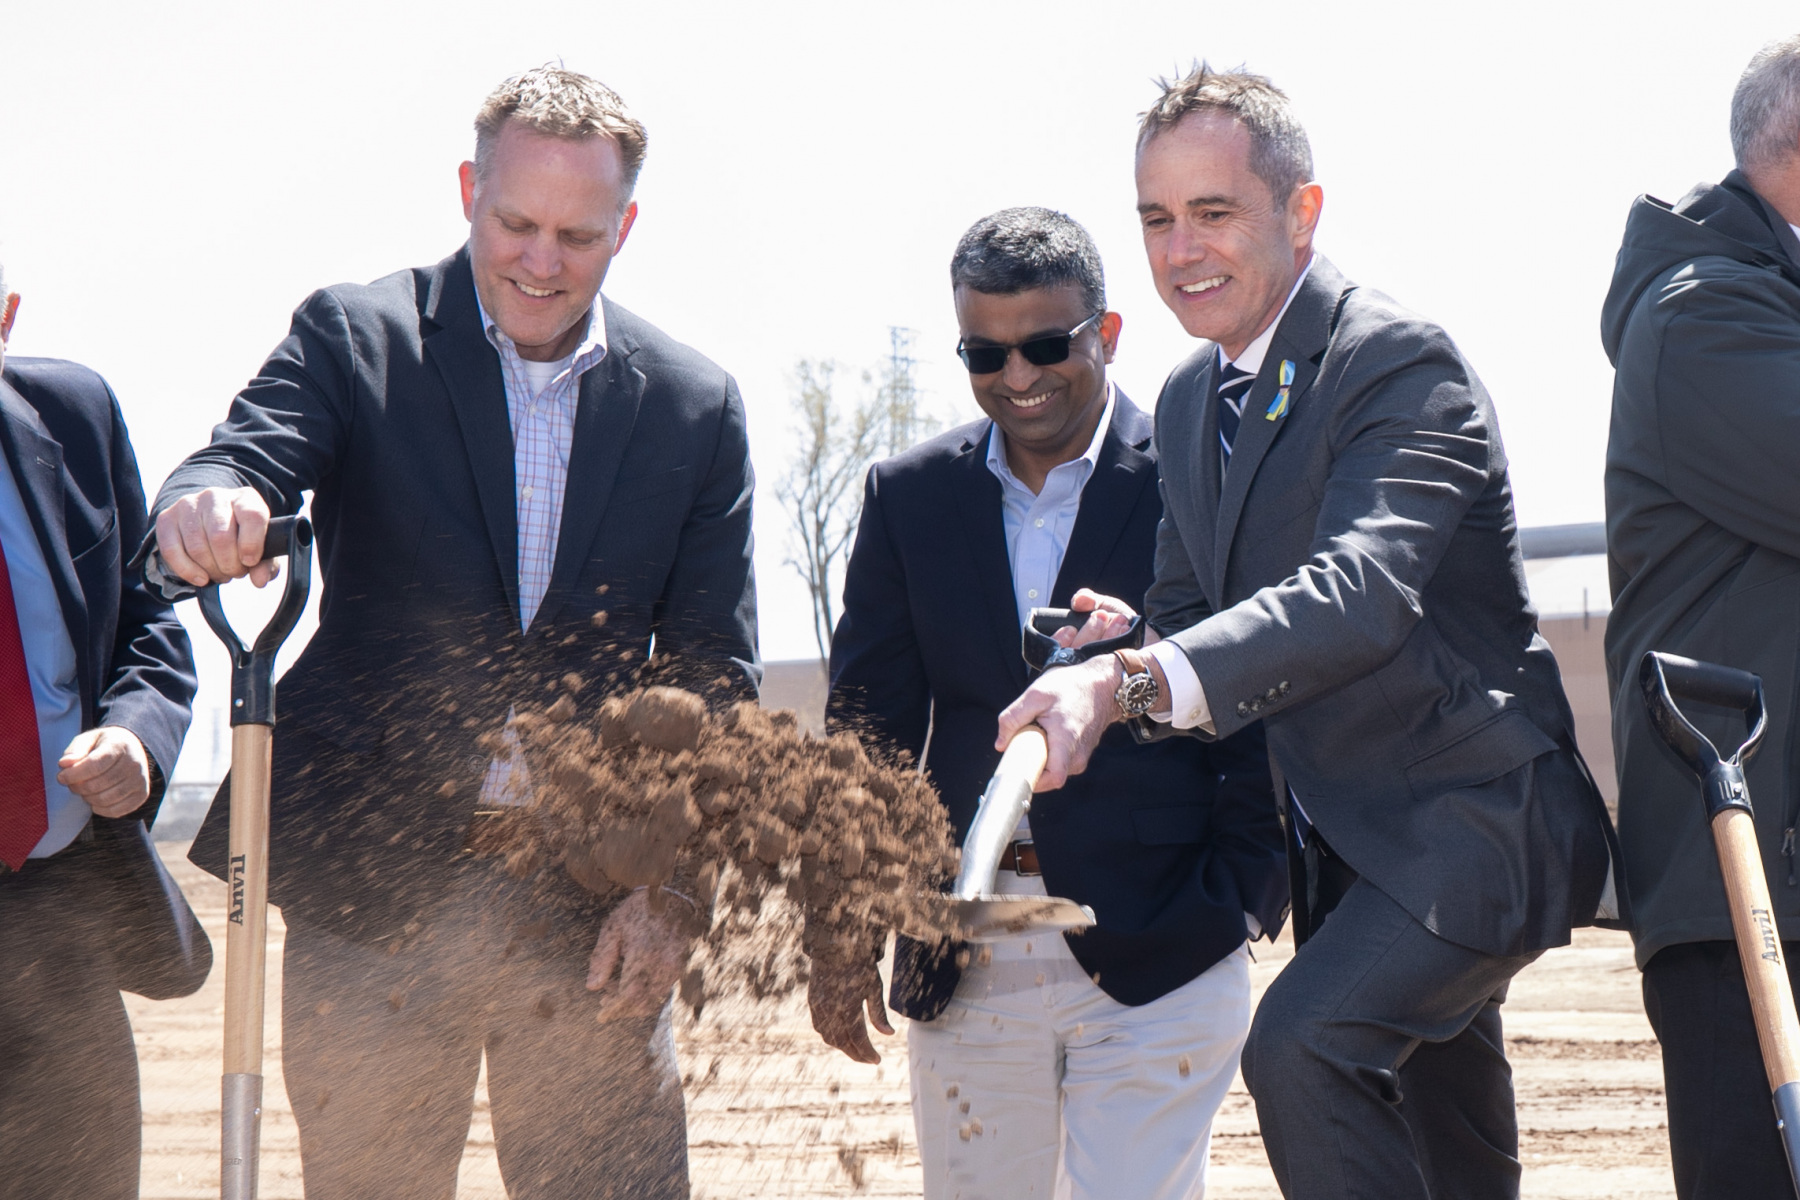 April 28, 2022: Sen. Santarsiero participated in the groundbreaking at NorthPoint Development, a 2,000-acre economic reimagining of the former U.S. Steel Fairless Hills Works in Falls Township, Bucks County.